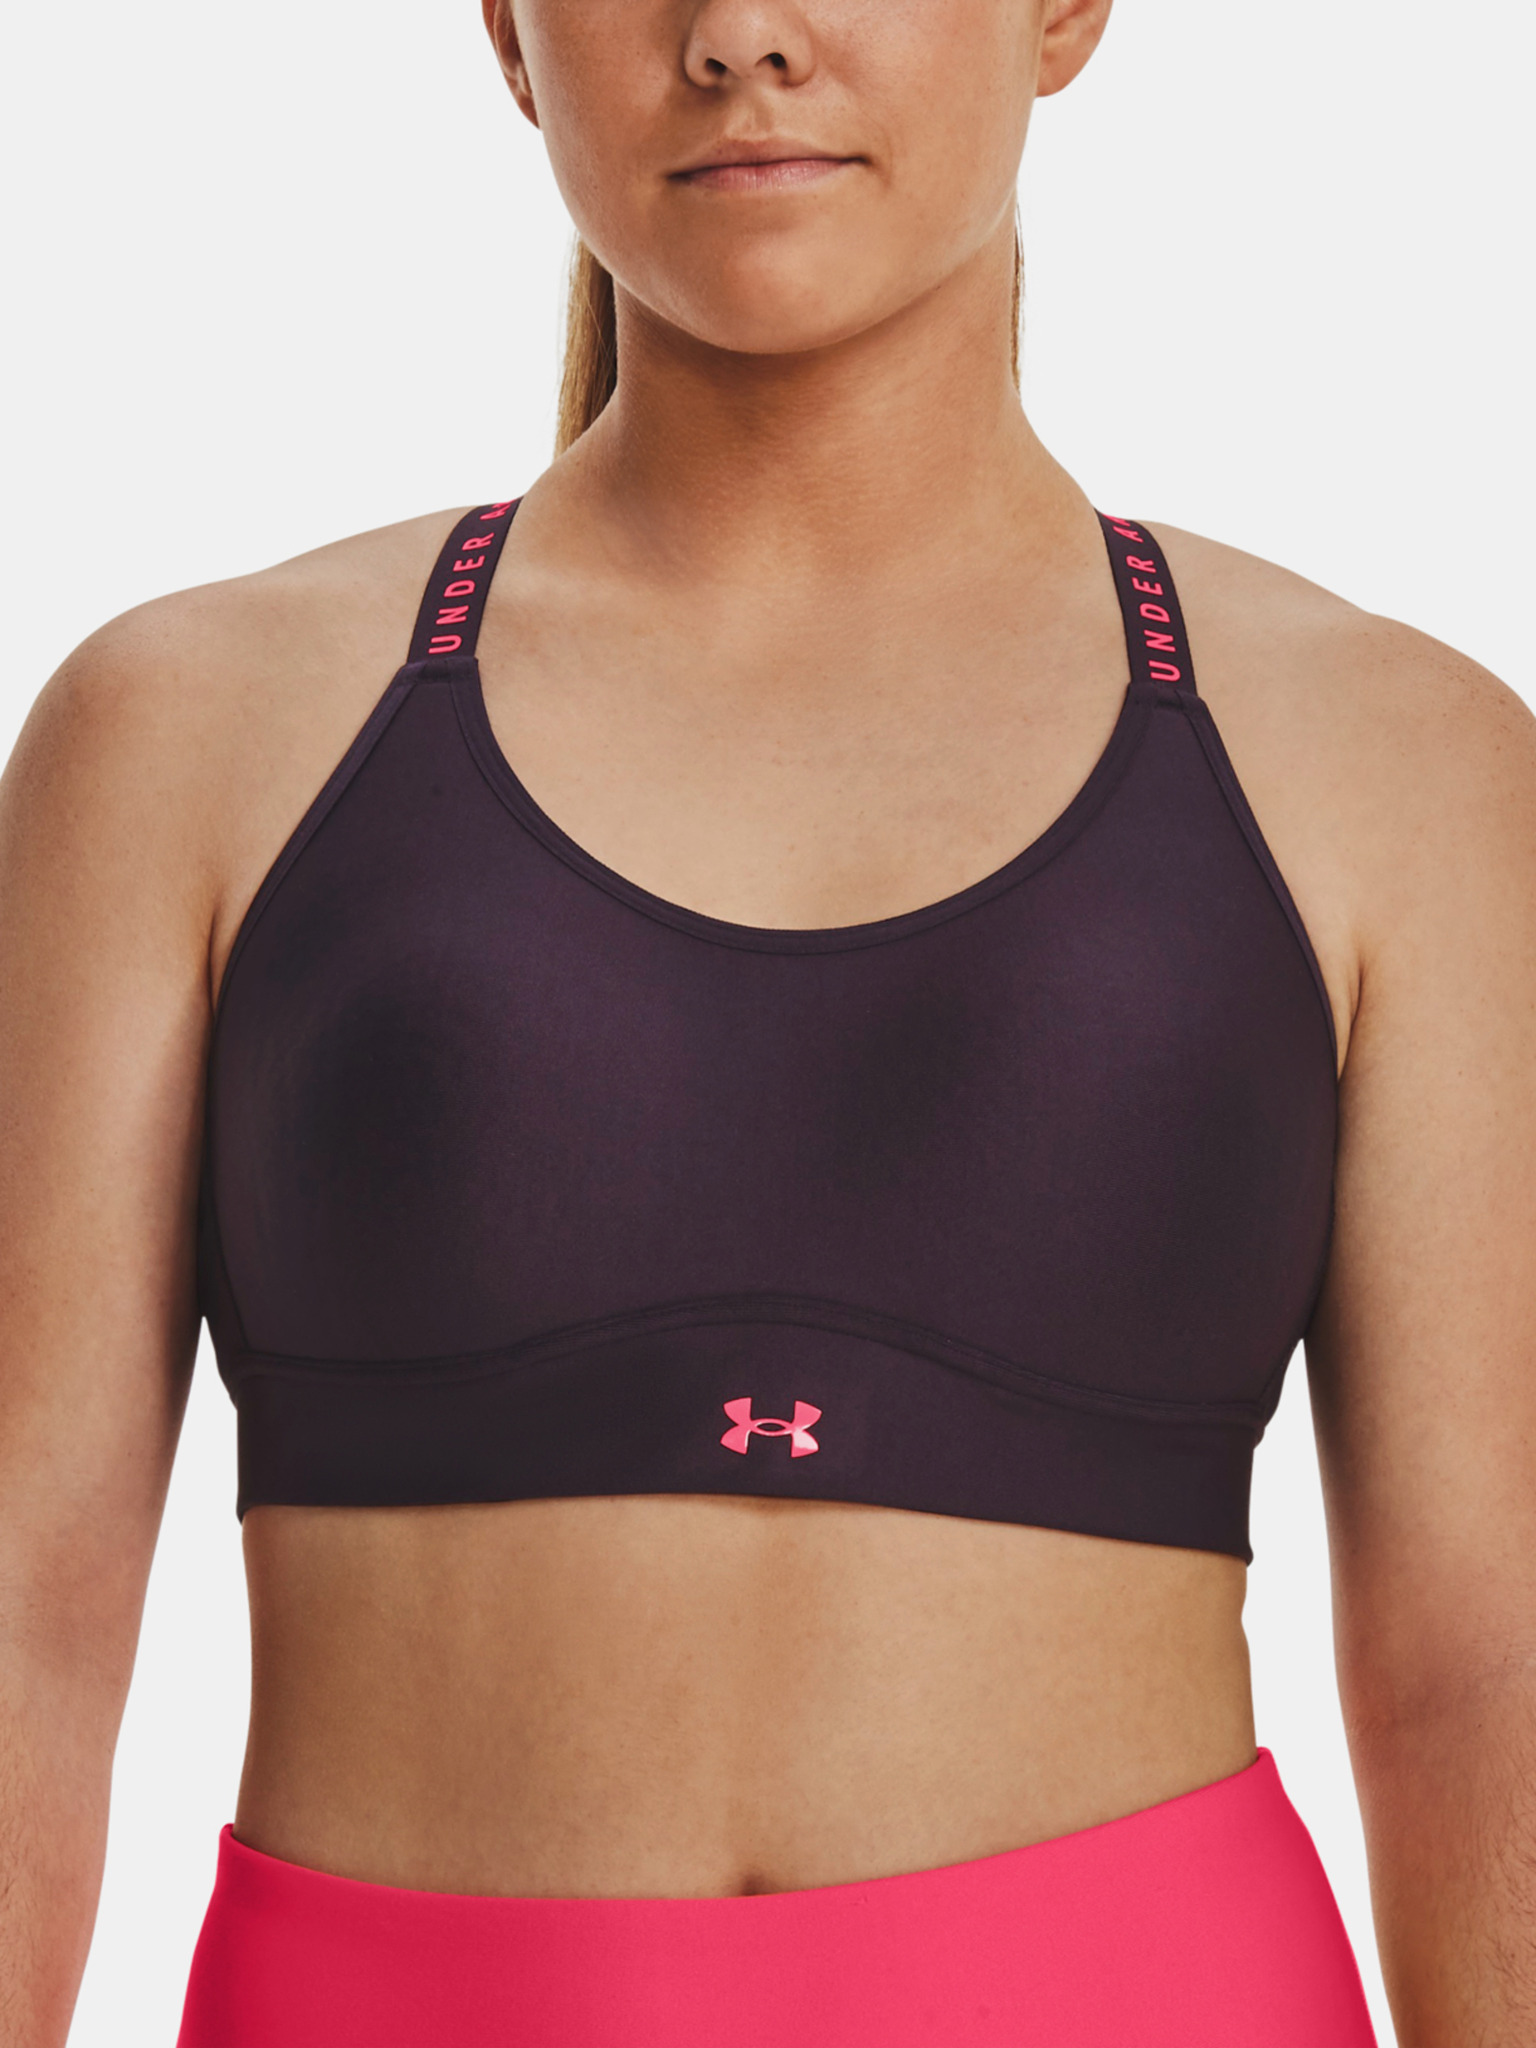  Infinity Covered Mid, Black - sports bra - UNDER